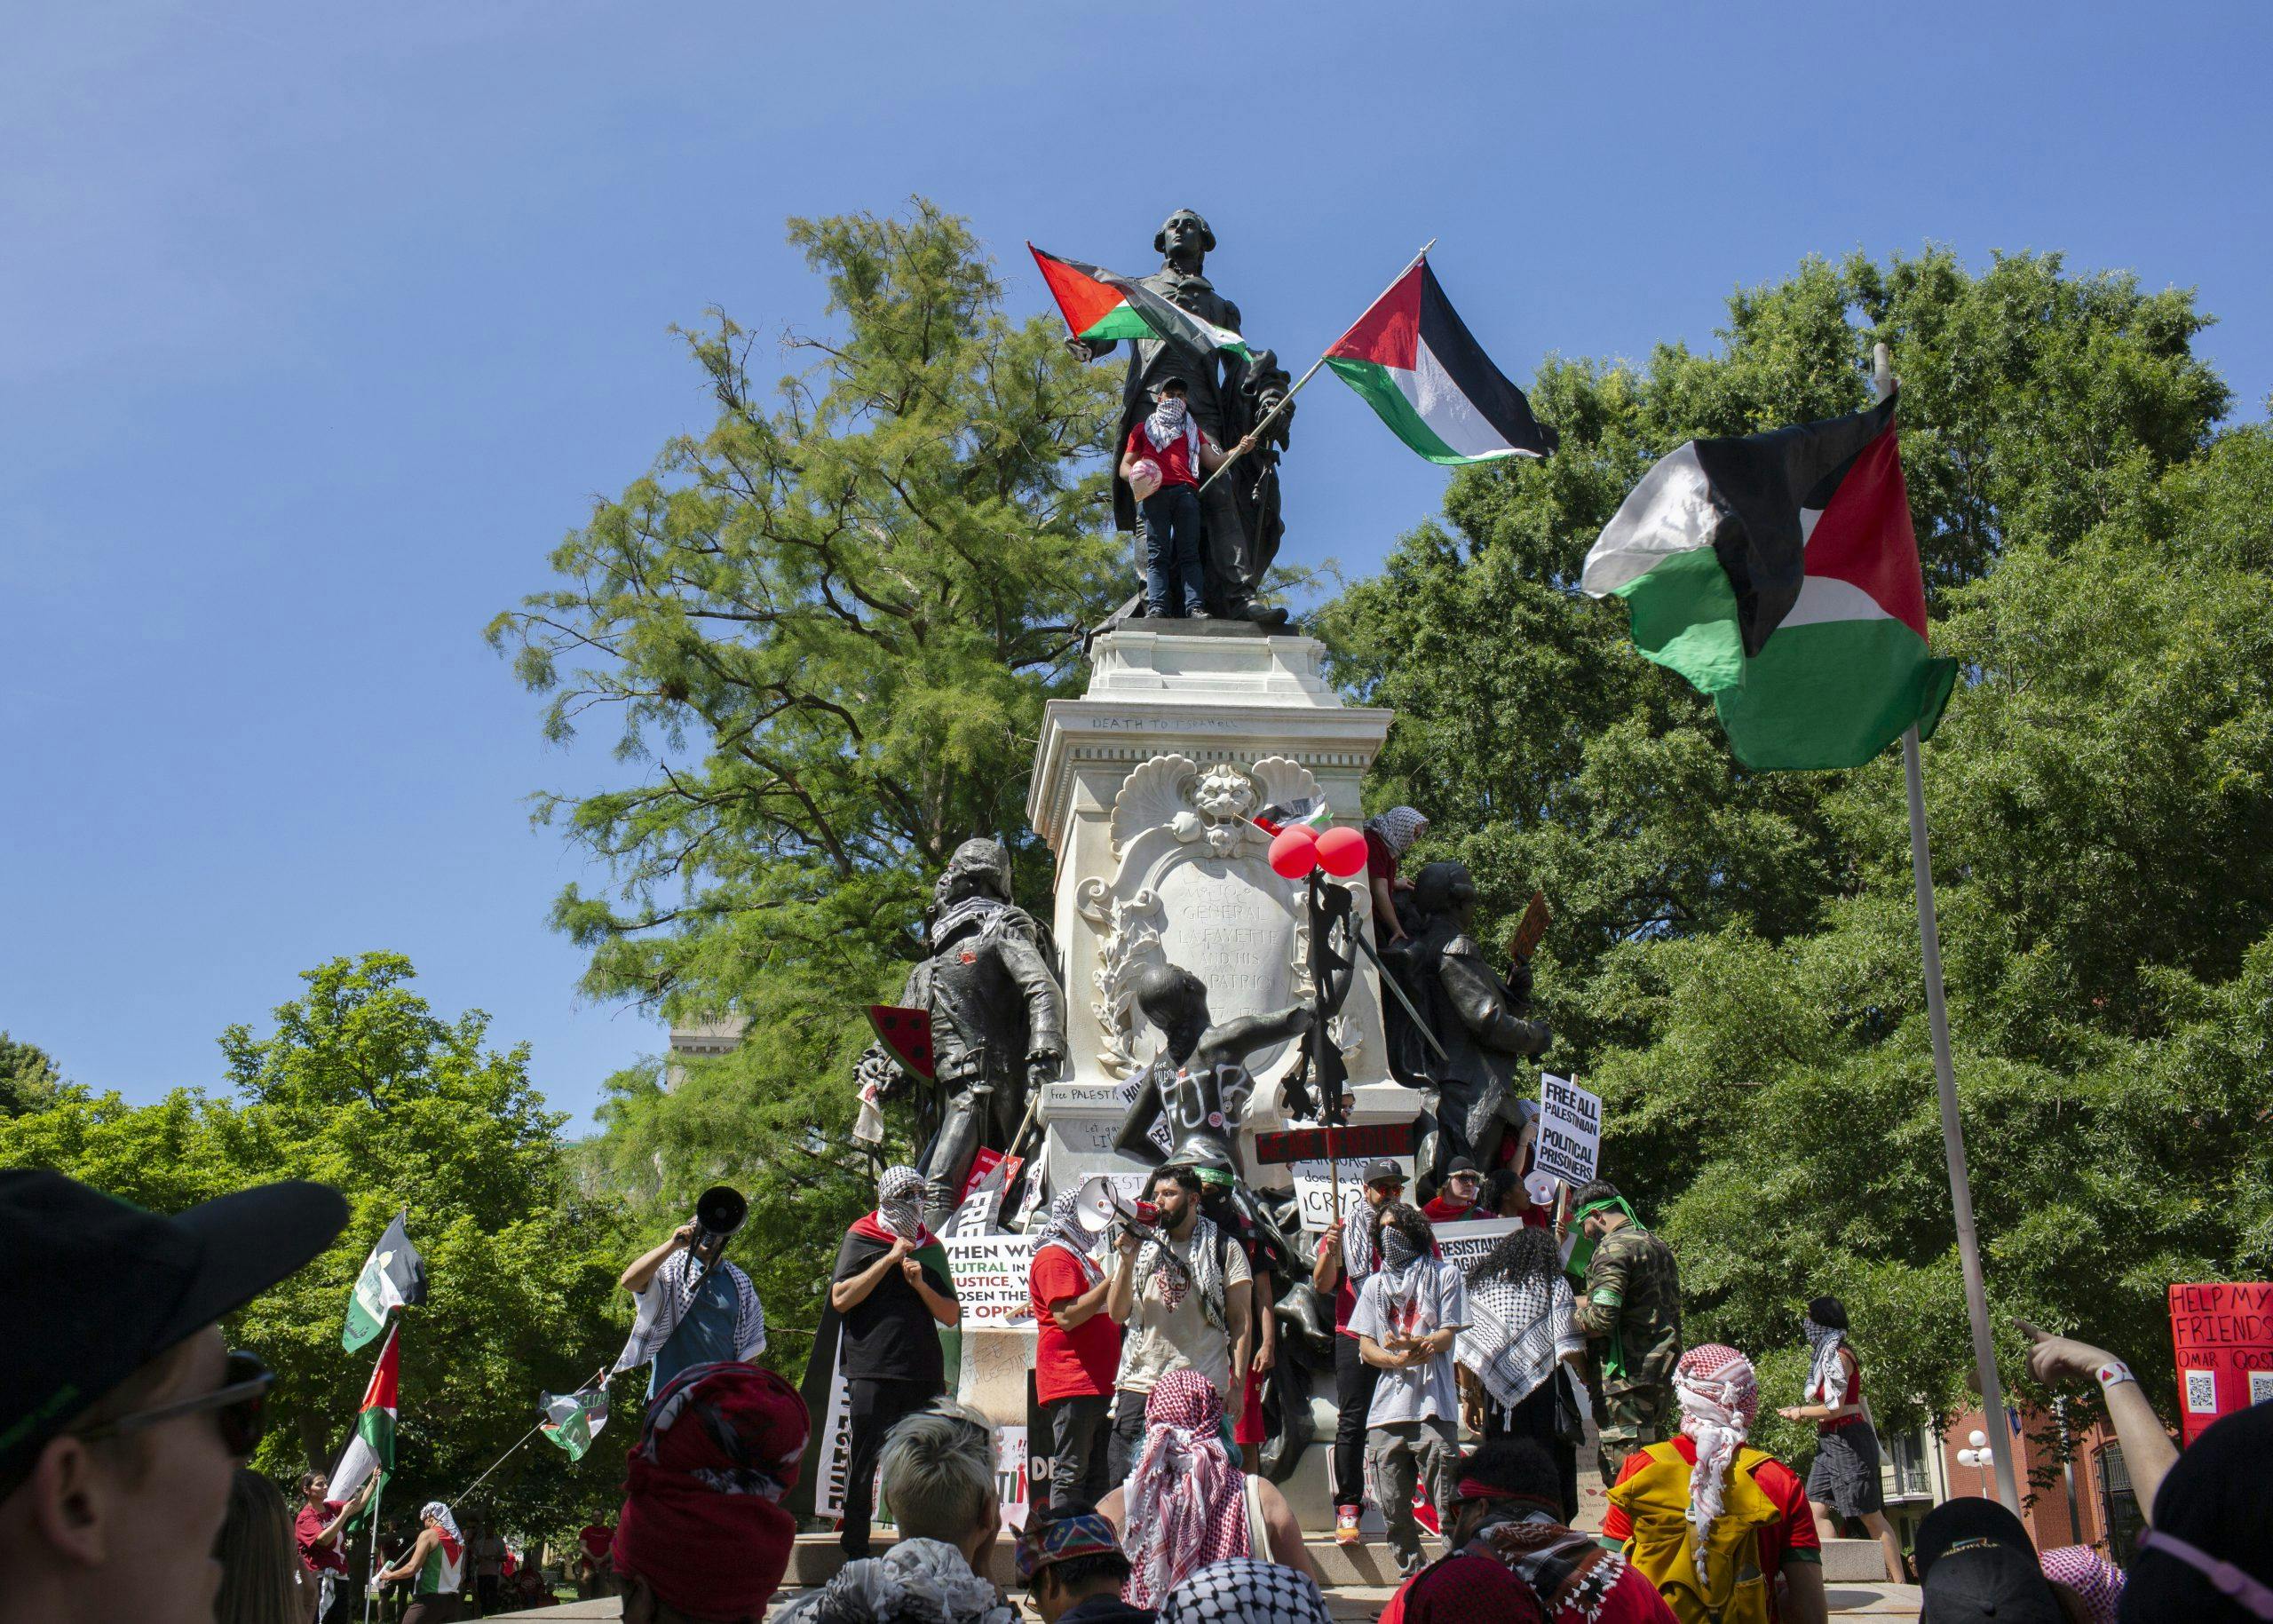 People with Palestinian flags climbing on a statue